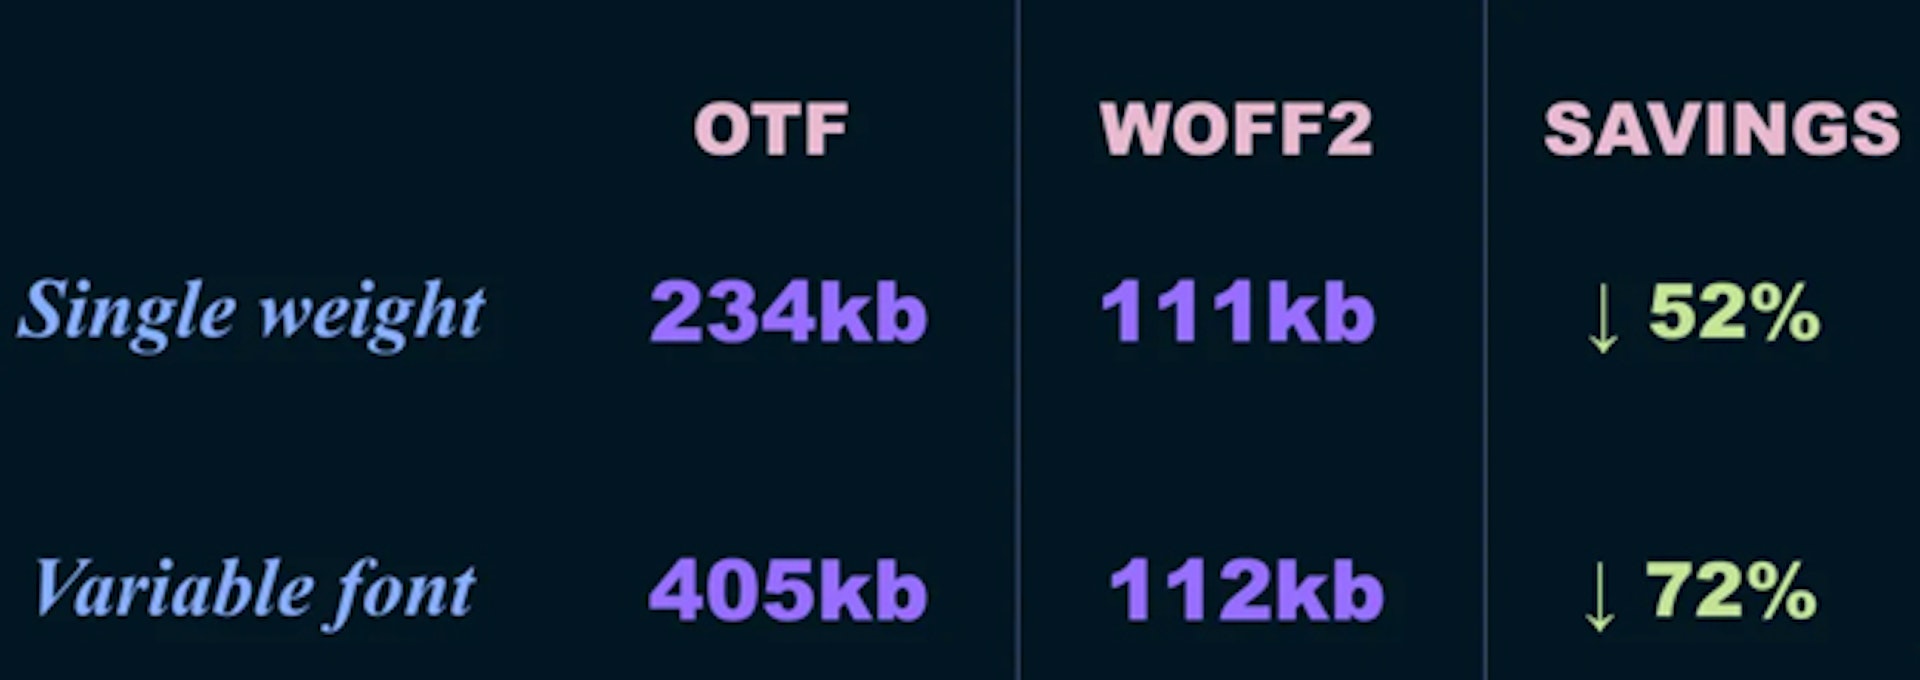 Font comparison image comparison size of OTF and WOFF2 fonts of variable fonts and standard fonts Single Weight: OTF: 234kb, WOFF2: 111kb Variable Font: OTF: 405kb, WOFF2: 112kb